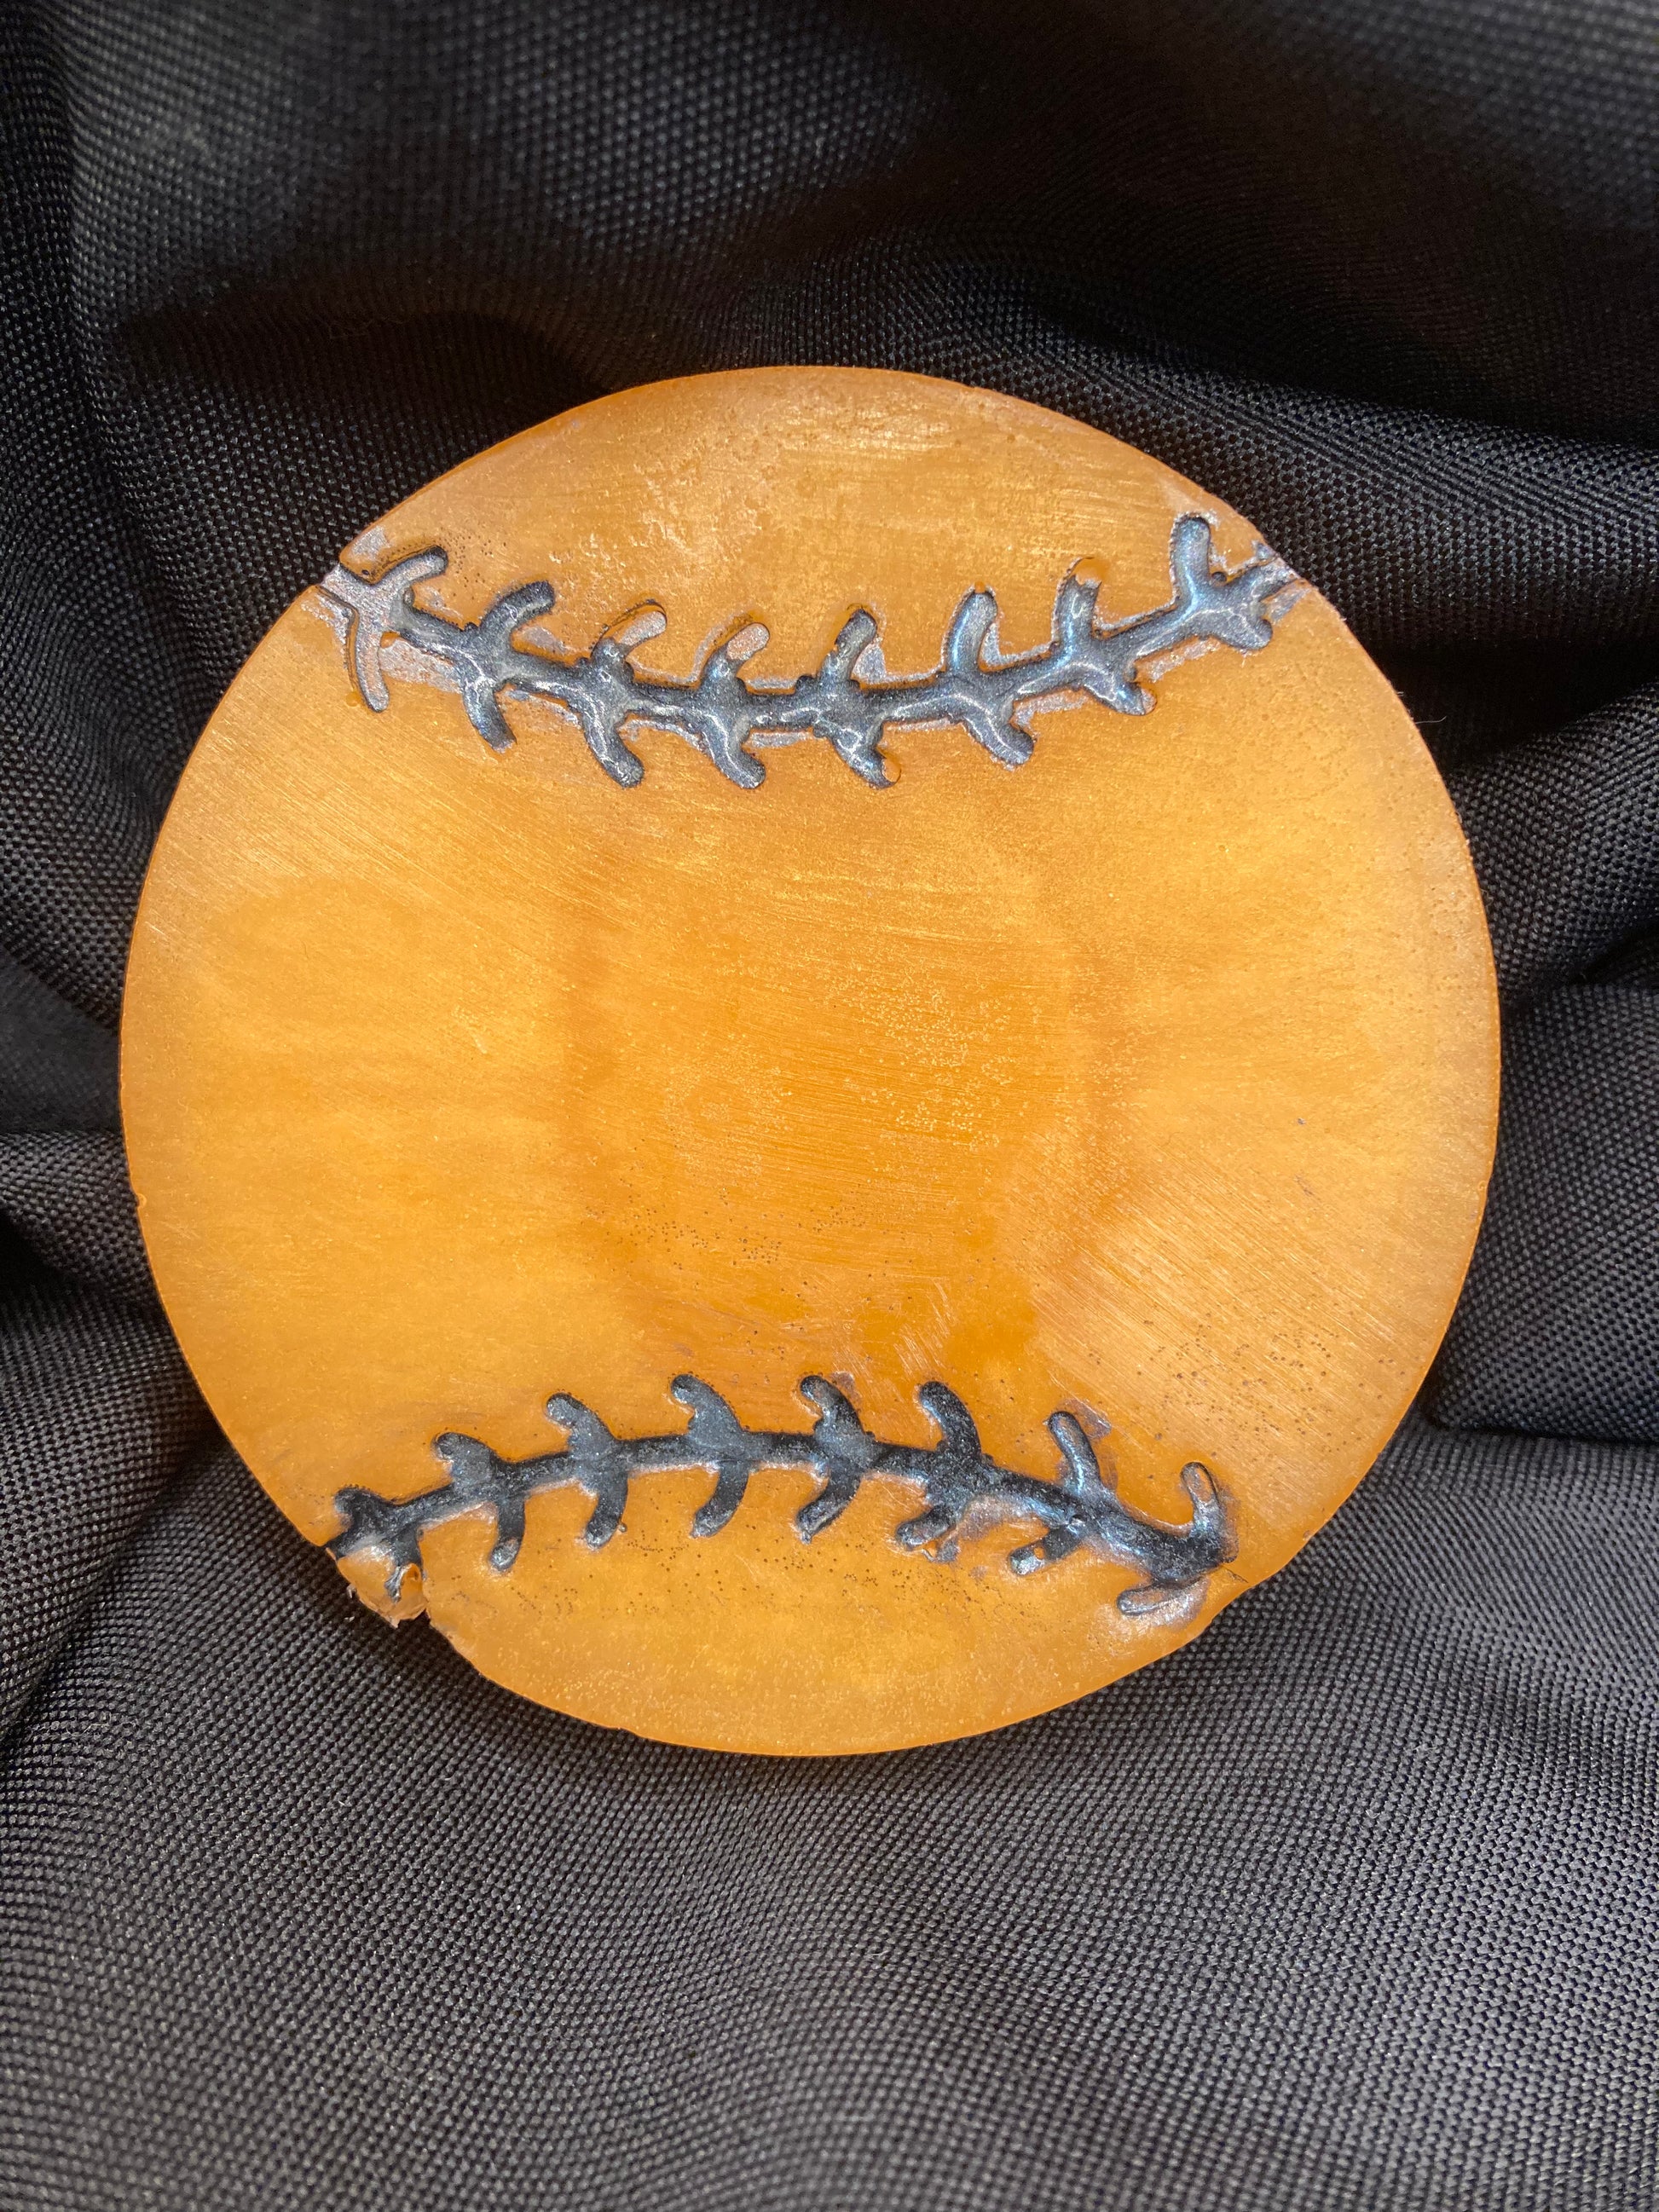 Let’s Go O’s!  These baseball shaped Orange Crush Scented  Glycerin Soaps are perfect for any baseball lover in your life!  These can be made in any color for your favorite team!  Reach out for special orders!    These make wonderful stocking stuffers!   The price is per bar.  Each item is individually made and may appear different from the photo.   